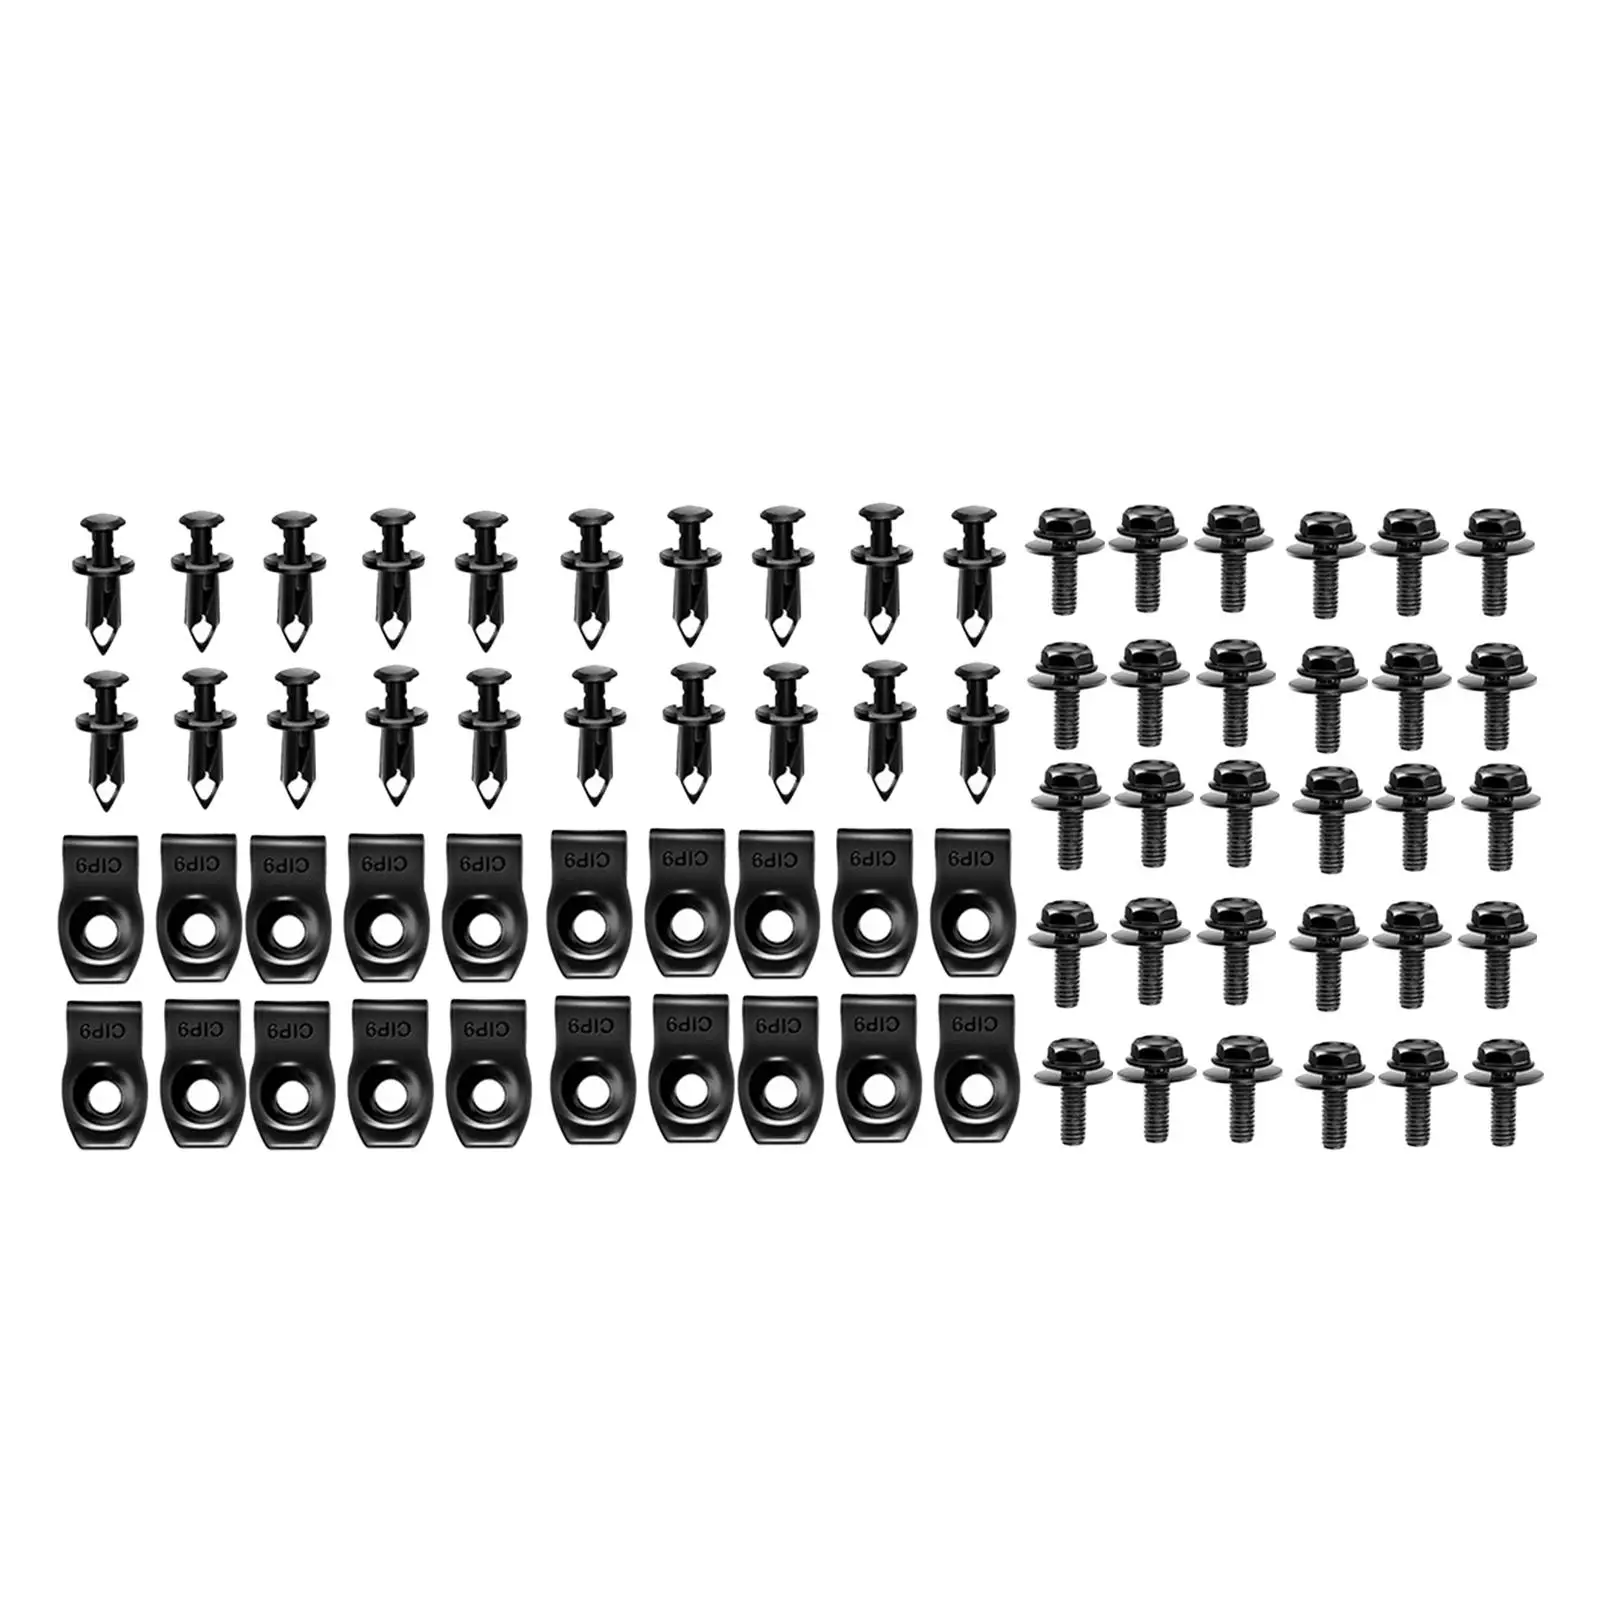 Car Body Bolts Body Bolts Screws Mudguard Fixer Bumpers Clamp Fastening Nut Universal Fittings Durable Portable Bumpers Clips